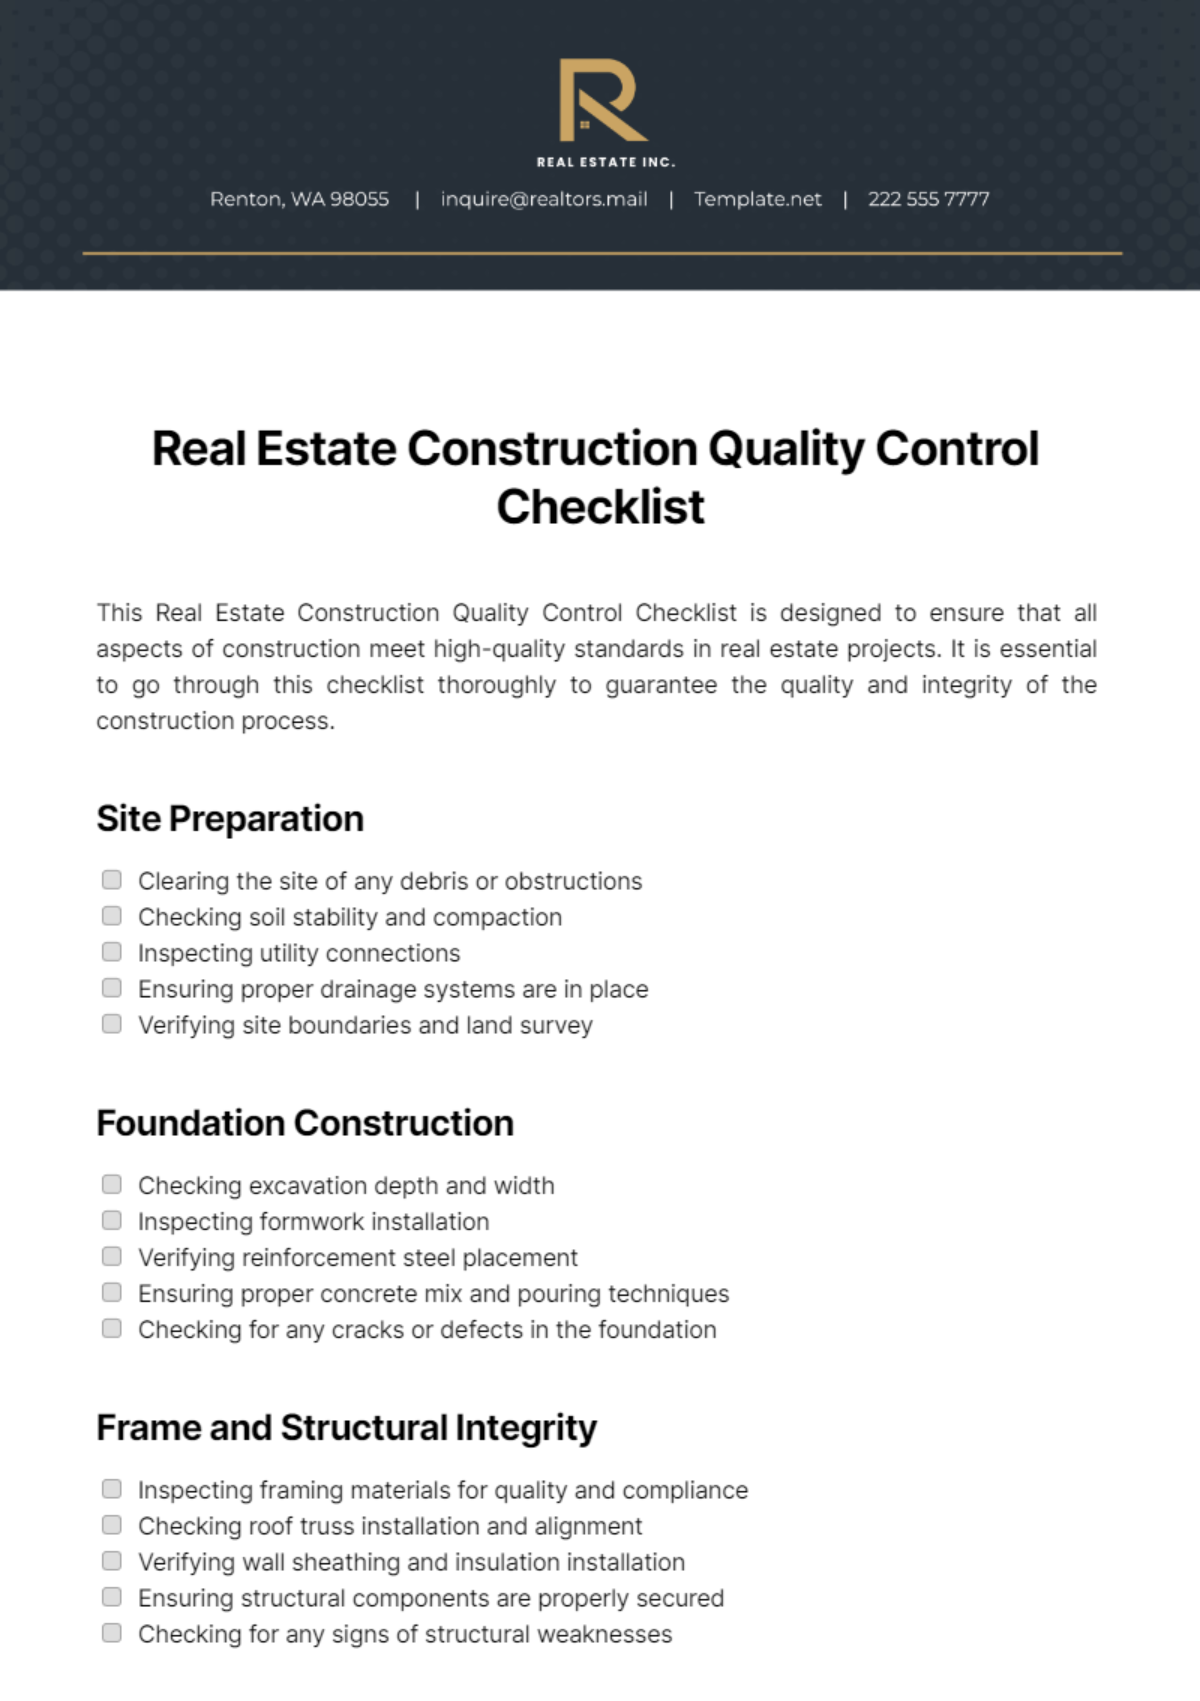 Real Estate Construction Quality Control Checklist Template